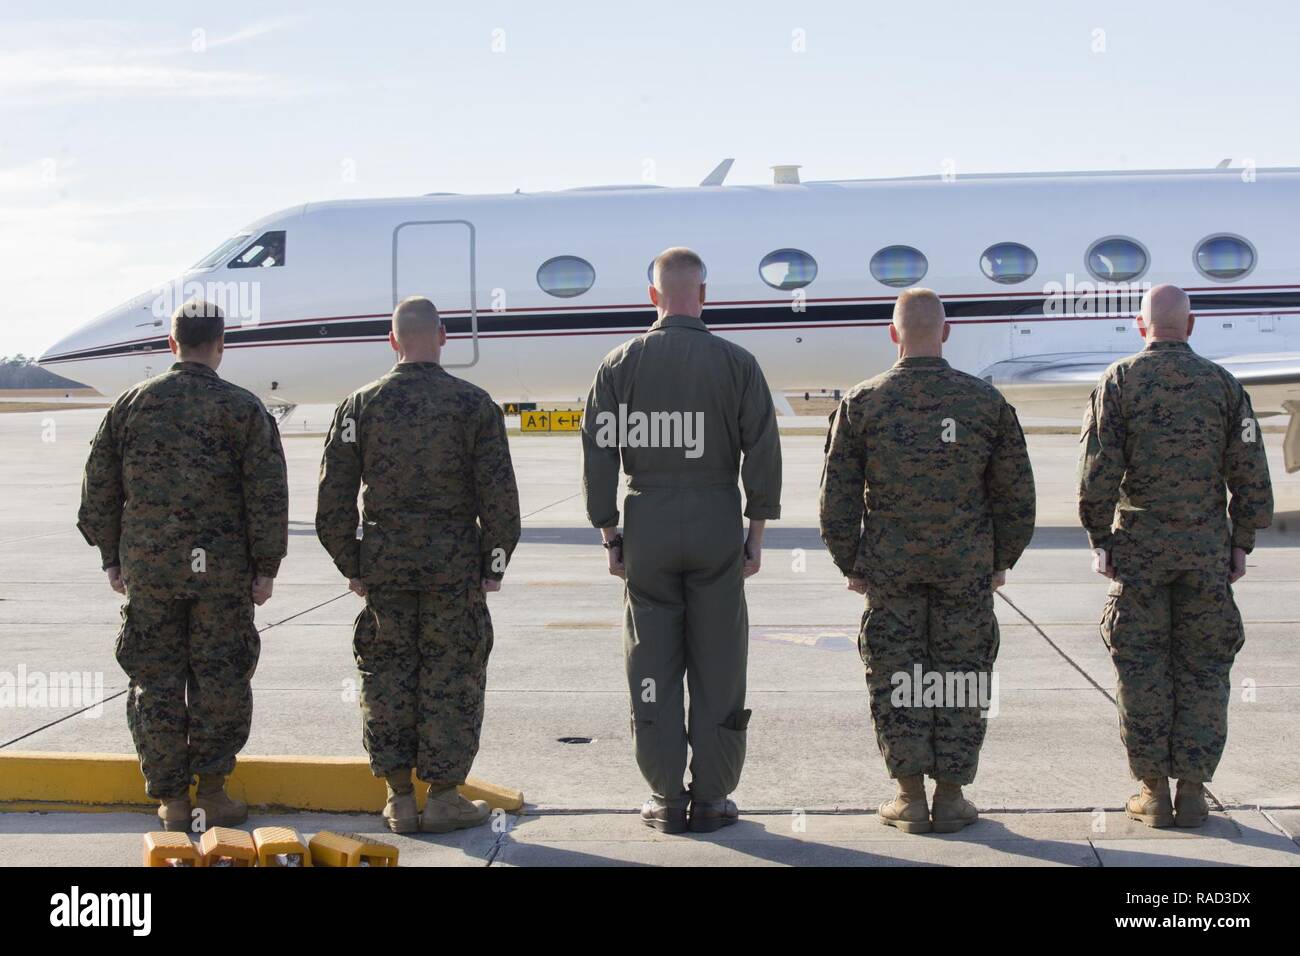 U.S. Marine Corps Maj. Gen. Walter L. Miller, commanding general, II Marine Expeditionary Force, and senior leaders stand at attention as Gen. Glenn Walters the Assistant Commandant of the Marine Corps departs Marine Corps Air Station New River, N.C., Jan. 27, 2017. The purpose of the visit was to increase awareness and capabilities of ground simulation and simulator training systems in support of operational forces combat readiness. Stock Photo